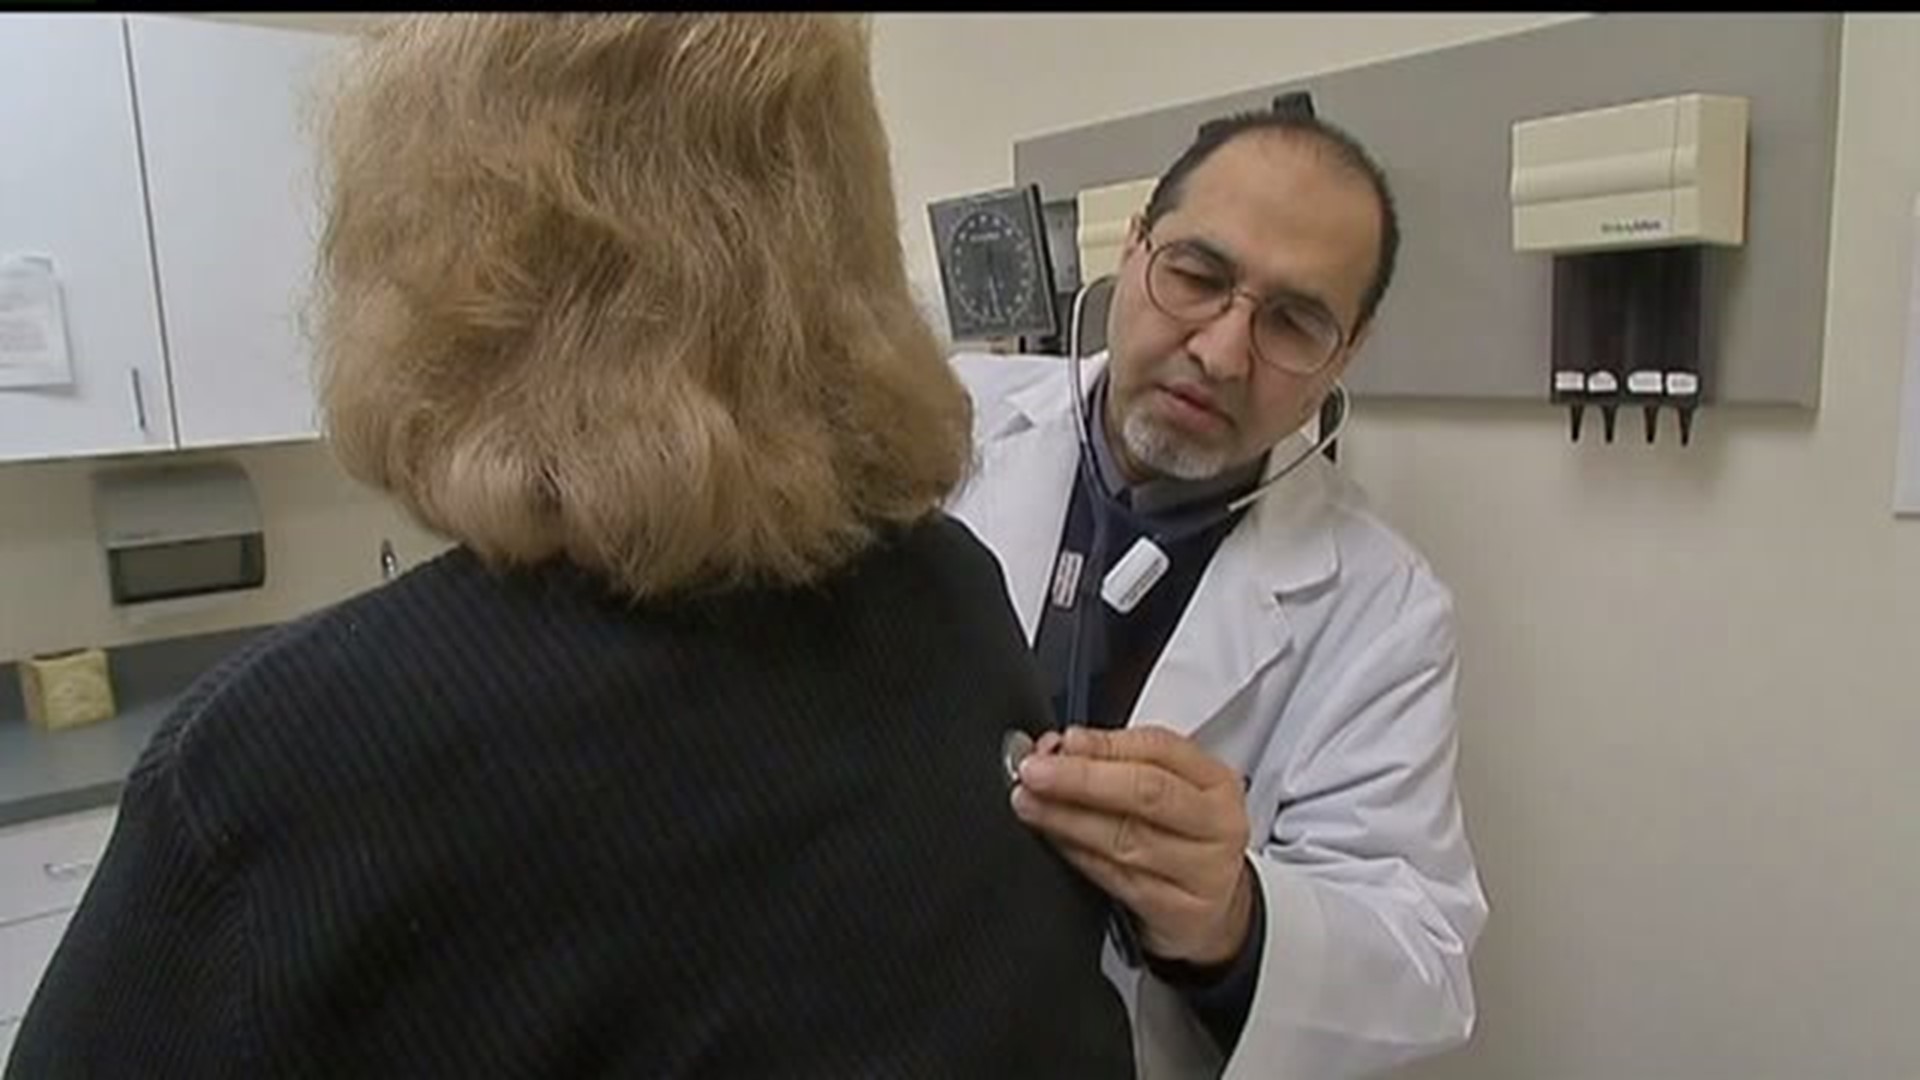 Lancaster doctors look to new way to reach patients